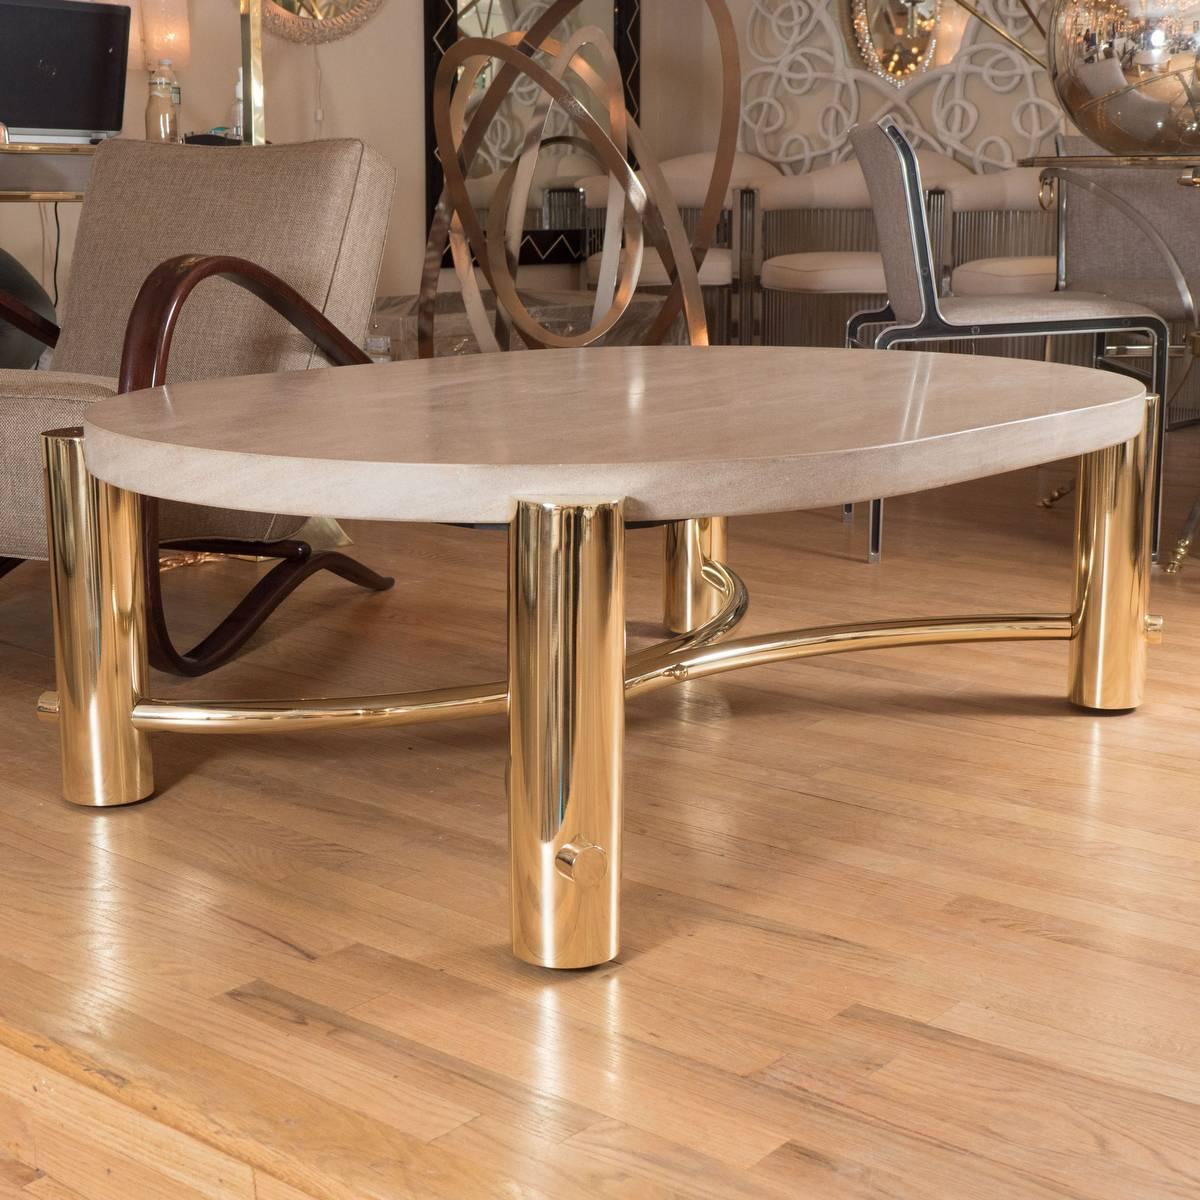 Elliptical coffee table with tubular brass frame and stone top.